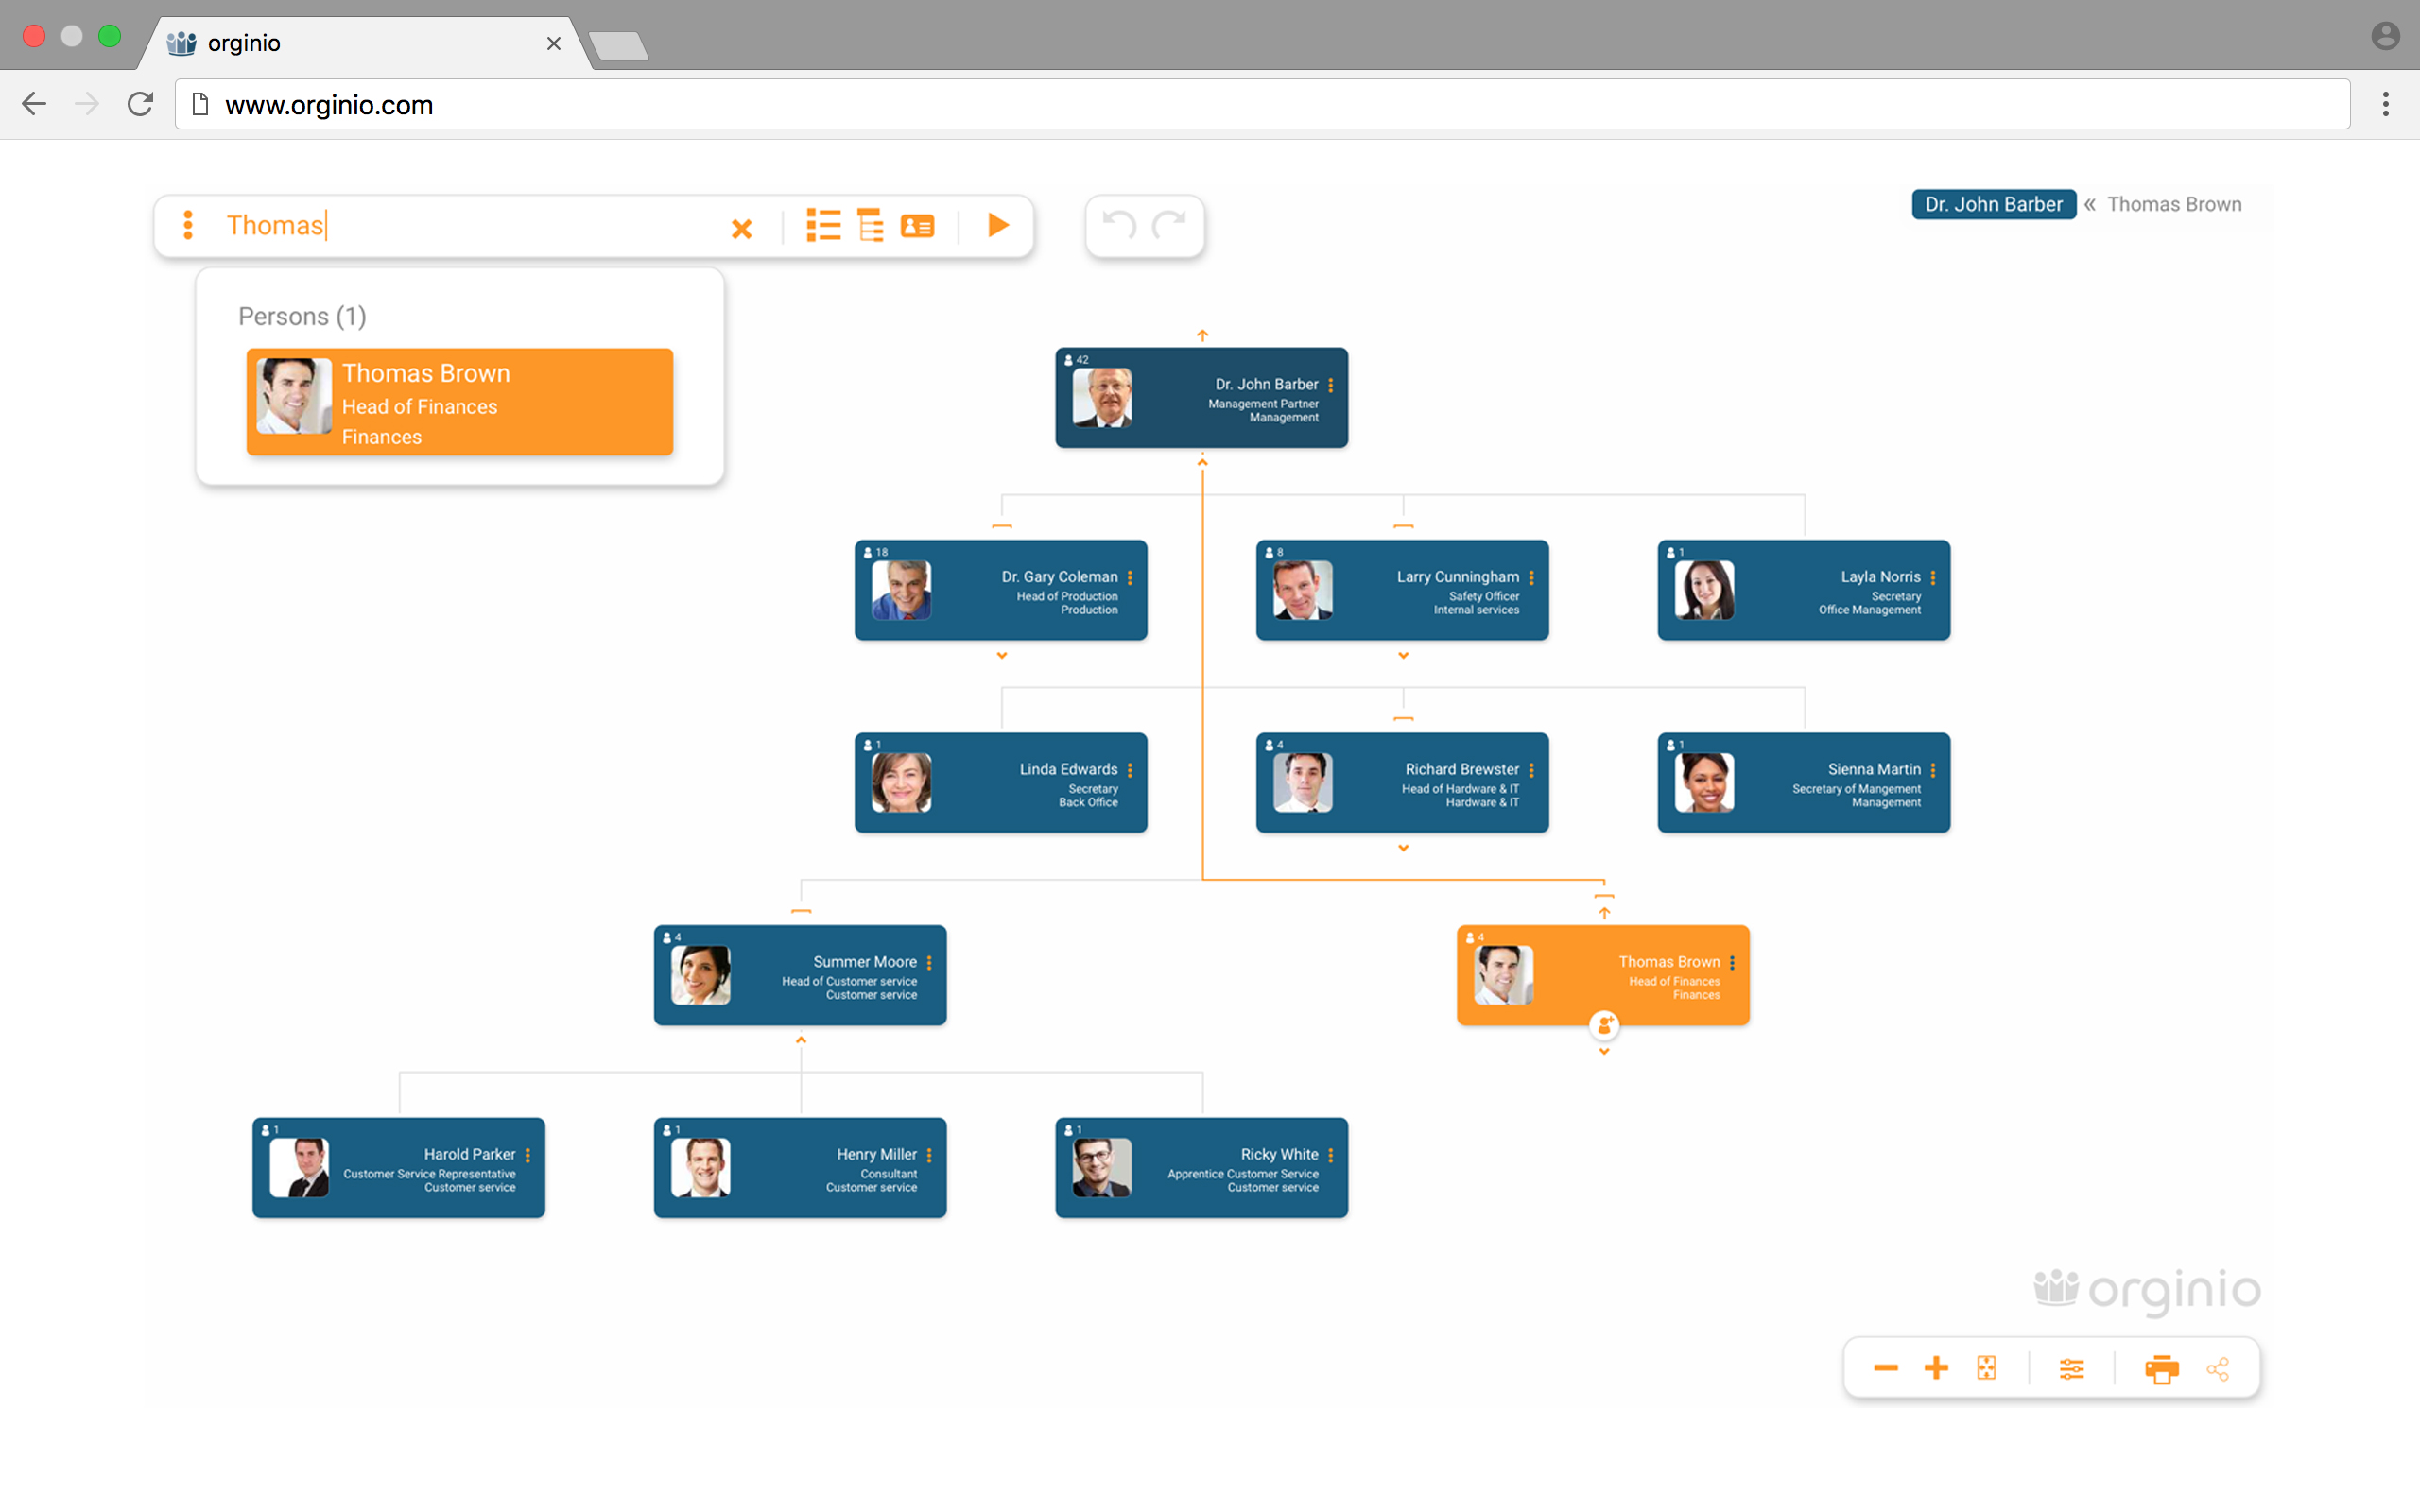 Easily search for any information in your online org chart with orginio